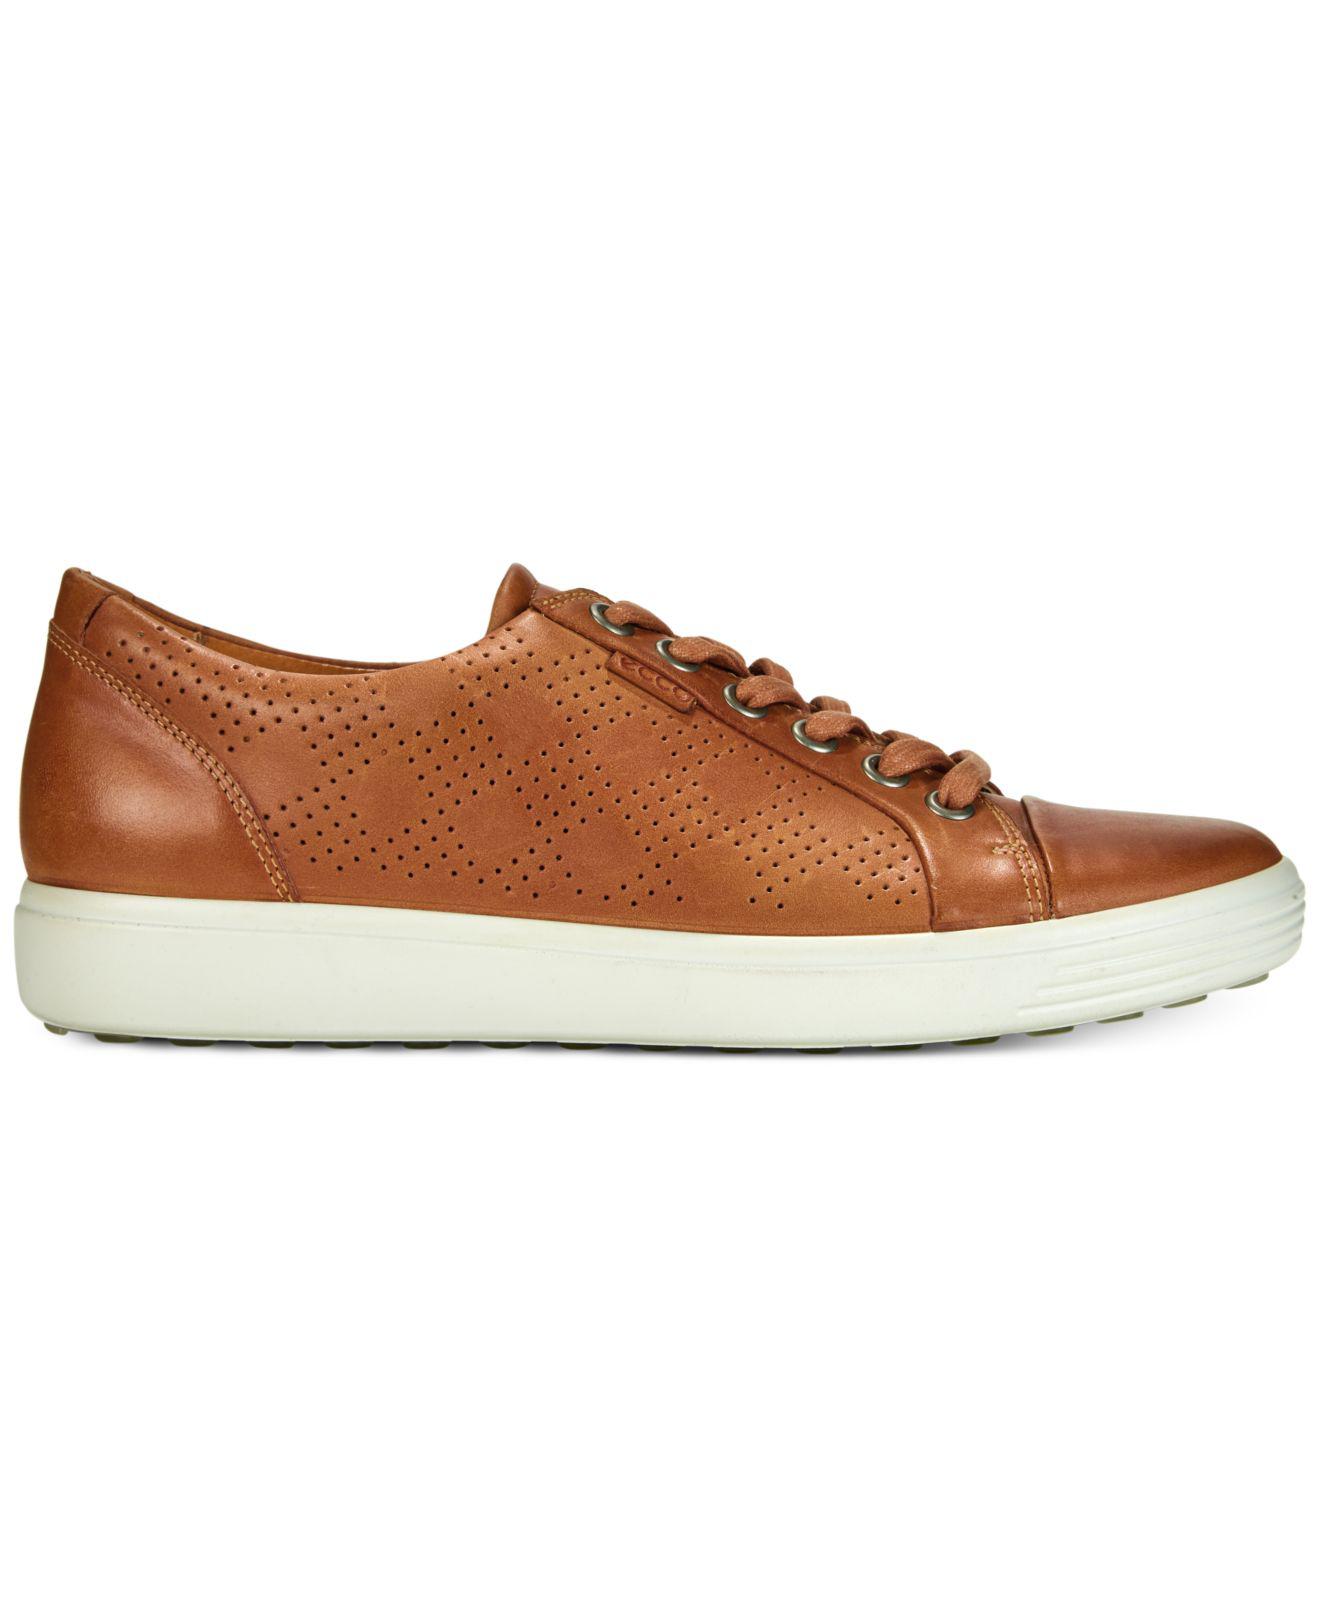 Ecco Leather Women's Soft 7 Perforated Lace-up Sneakers in Brown - Lyst